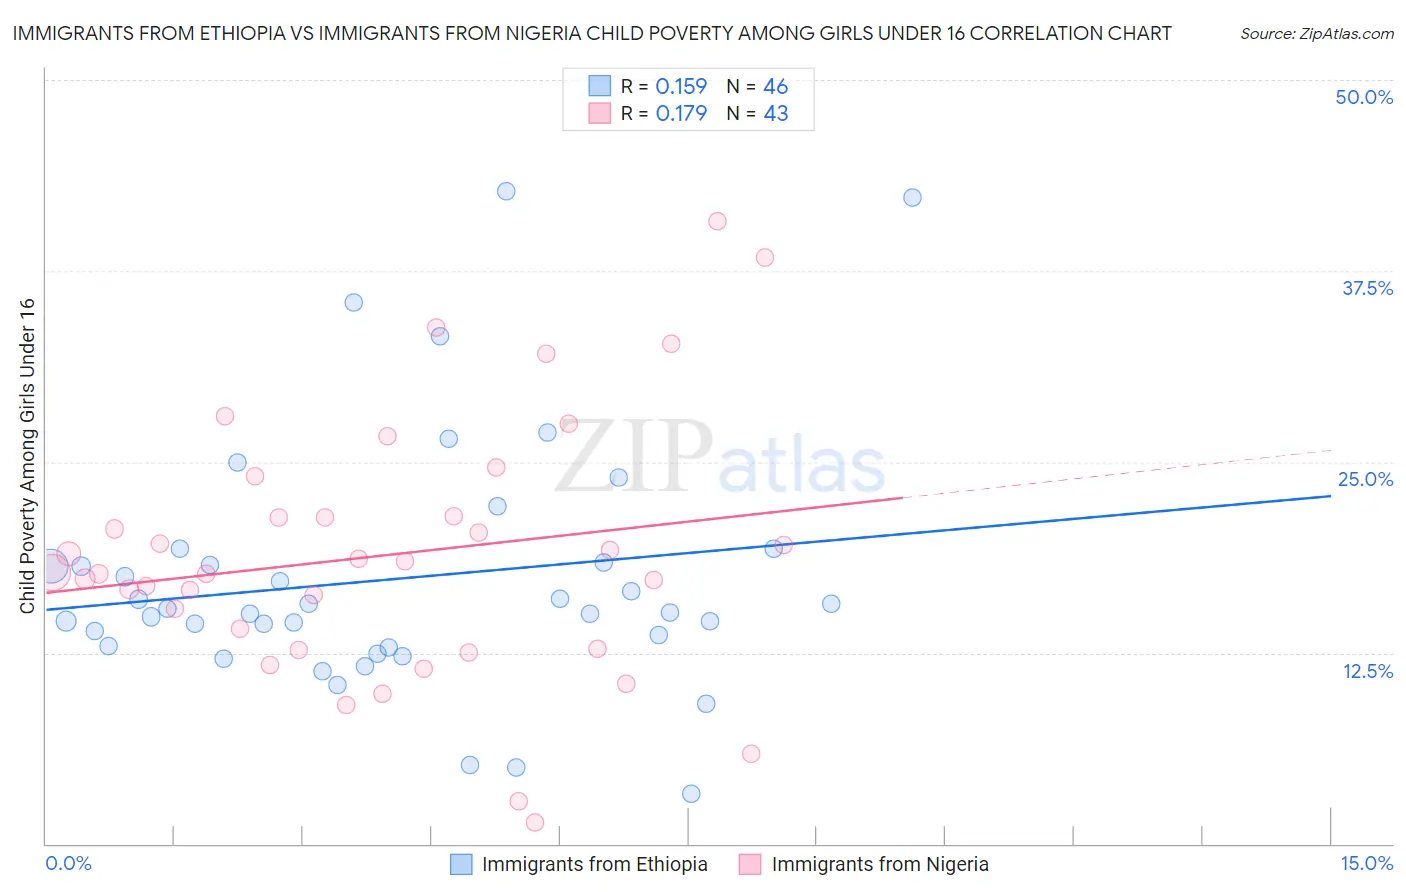 Immigrants from Ethiopia vs Immigrants from Nigeria Child Poverty Among Girls Under 16